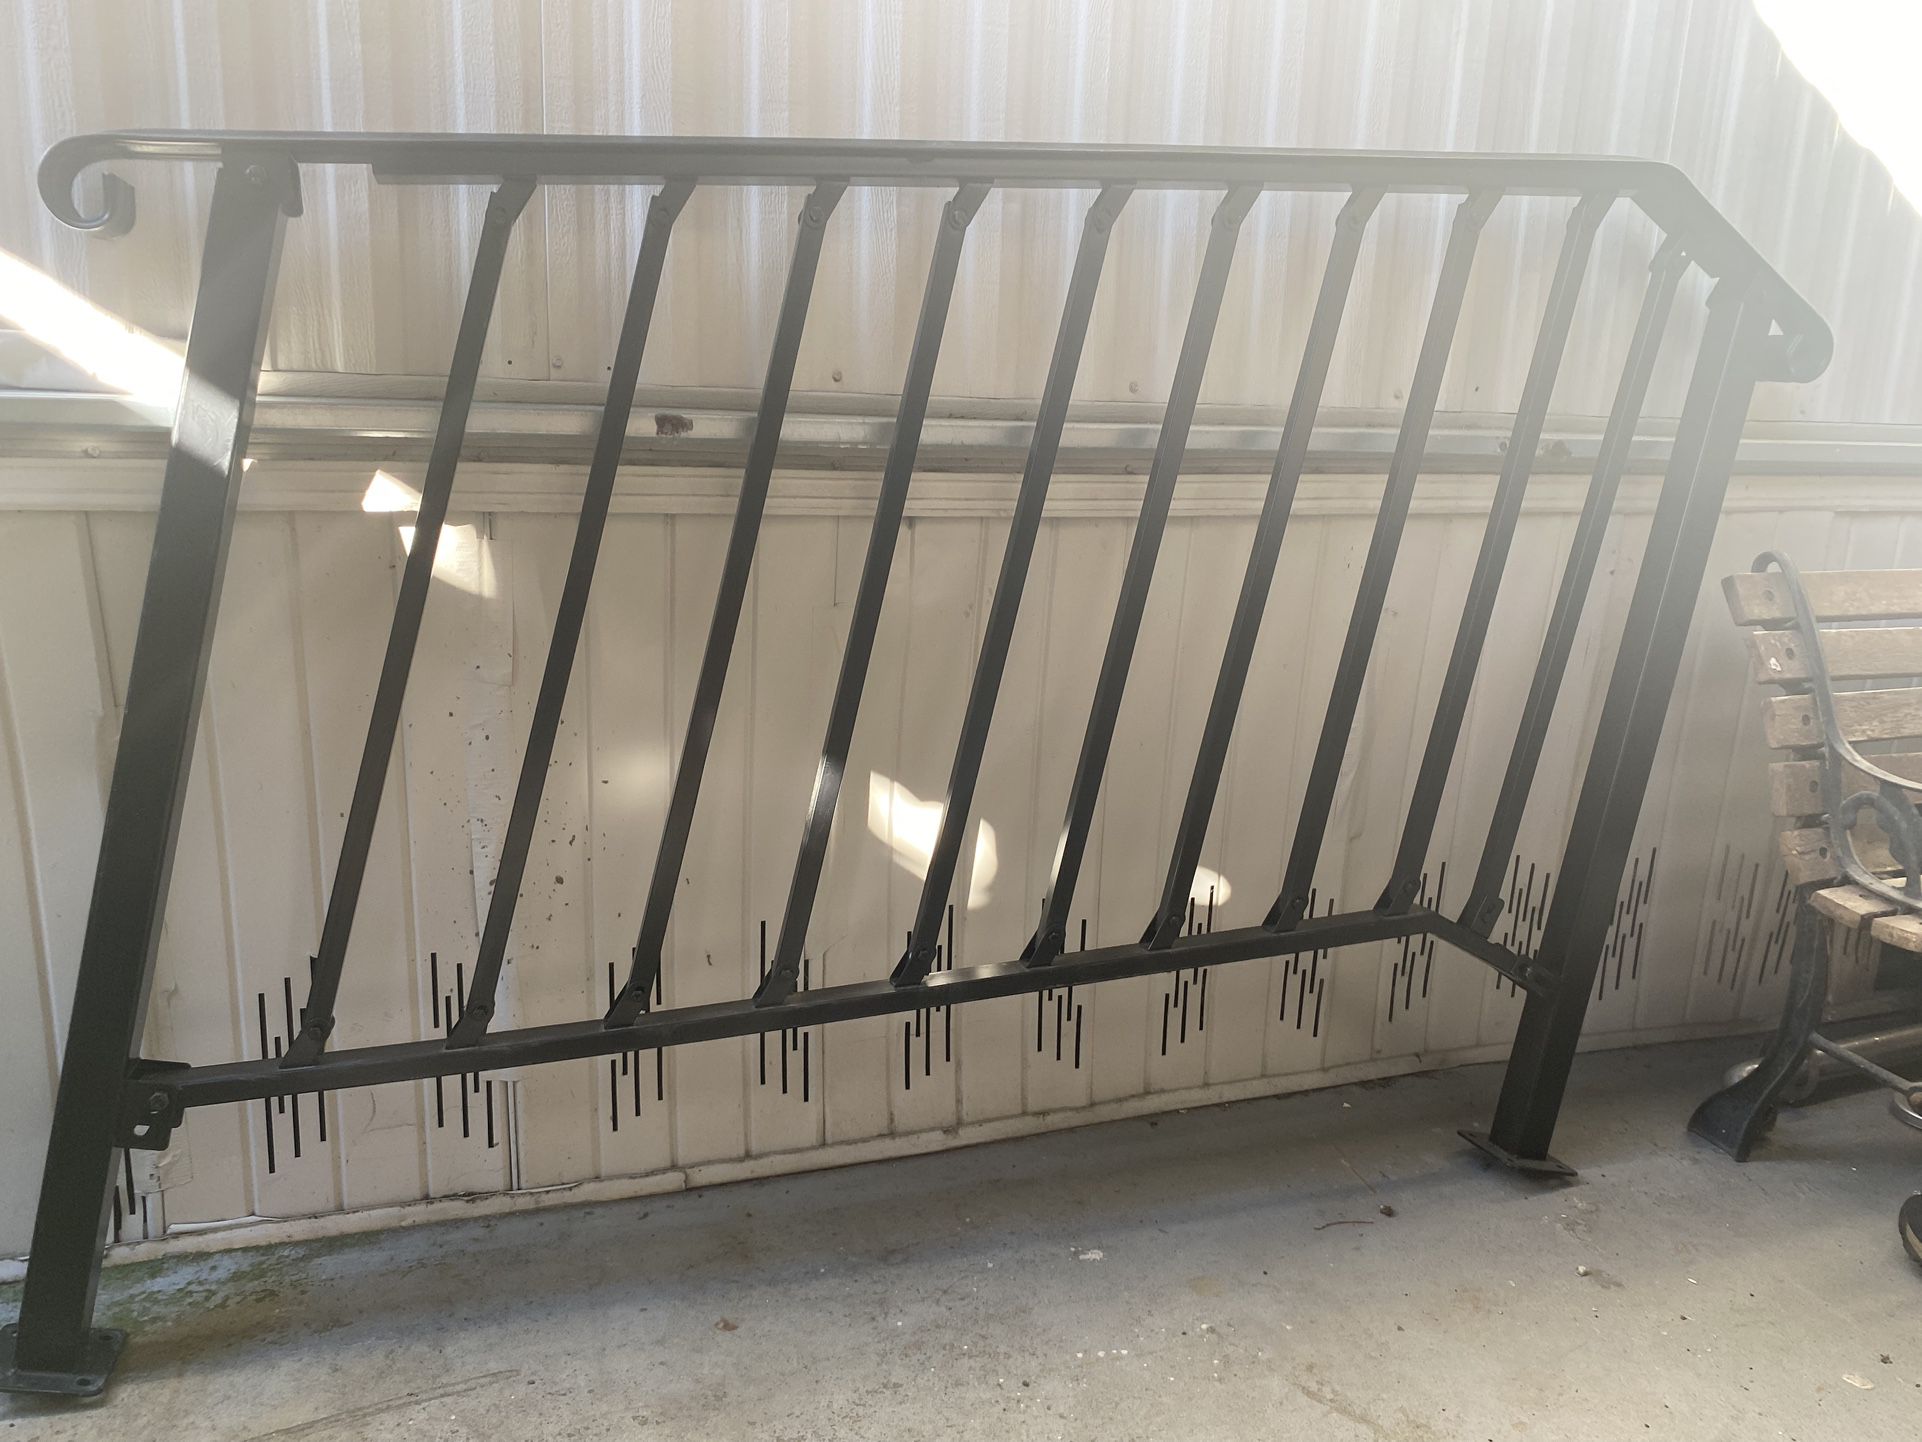 Wrought Iron  Handrail, About 4 Feet, 4-5 Steps